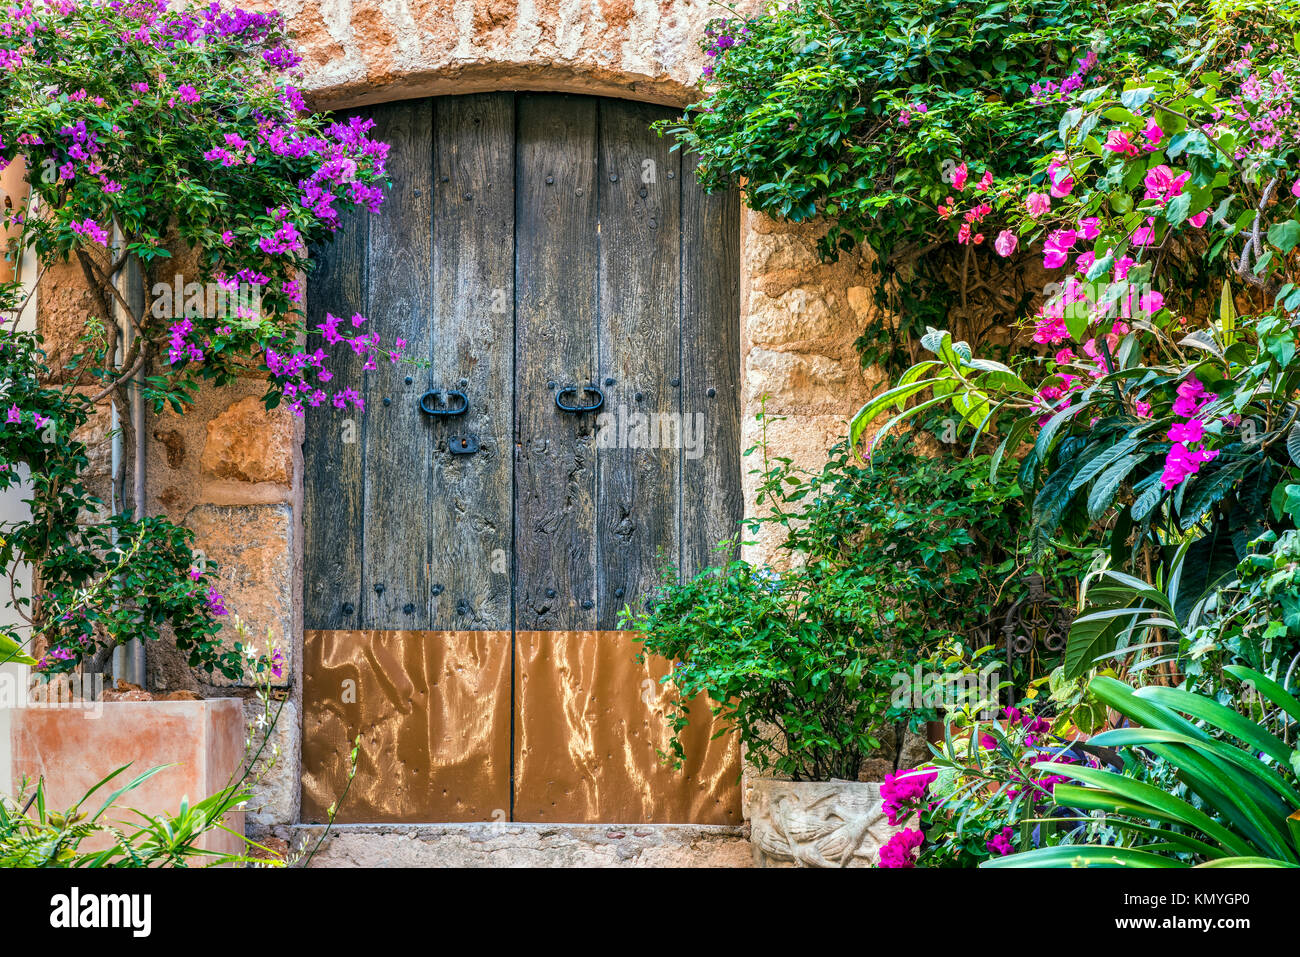 Picturesque street corner in the mountain village of Fornalutx, Majorca, Balearic Islands, Spain Stock Photo